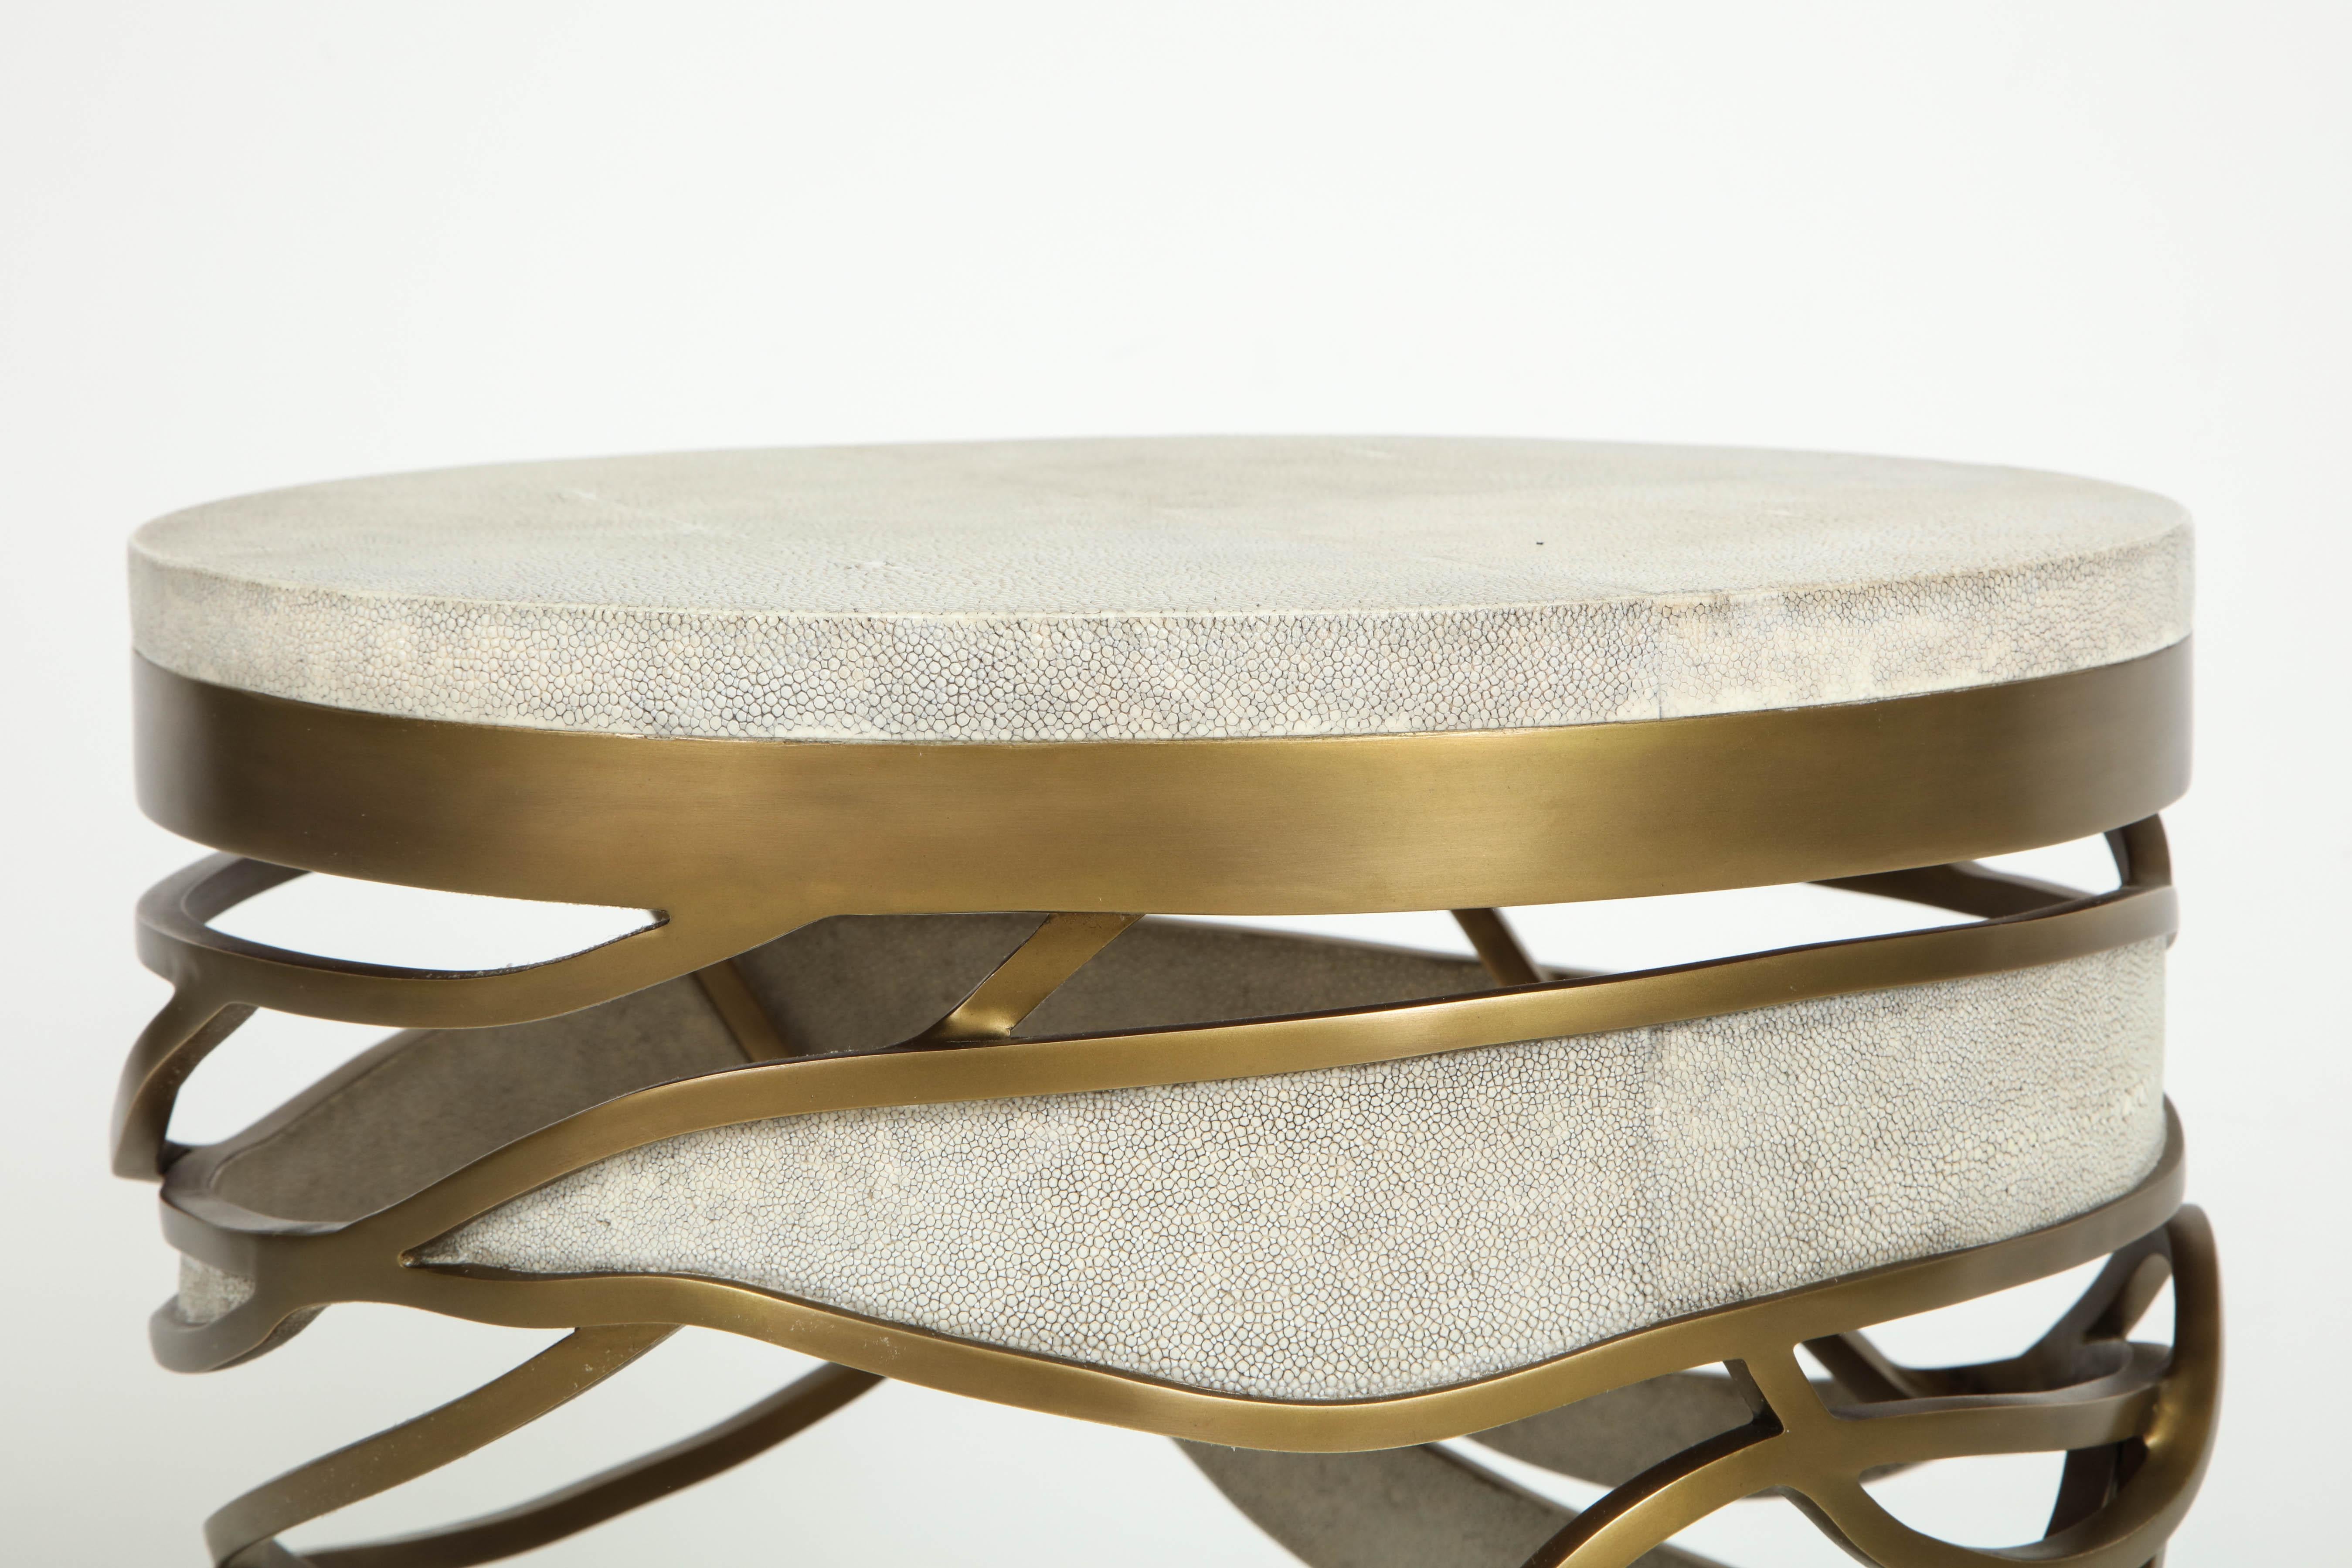 Art Deco Shagreen Stool or Side Table with Brass Details, Contemporary, Cream Shagreen